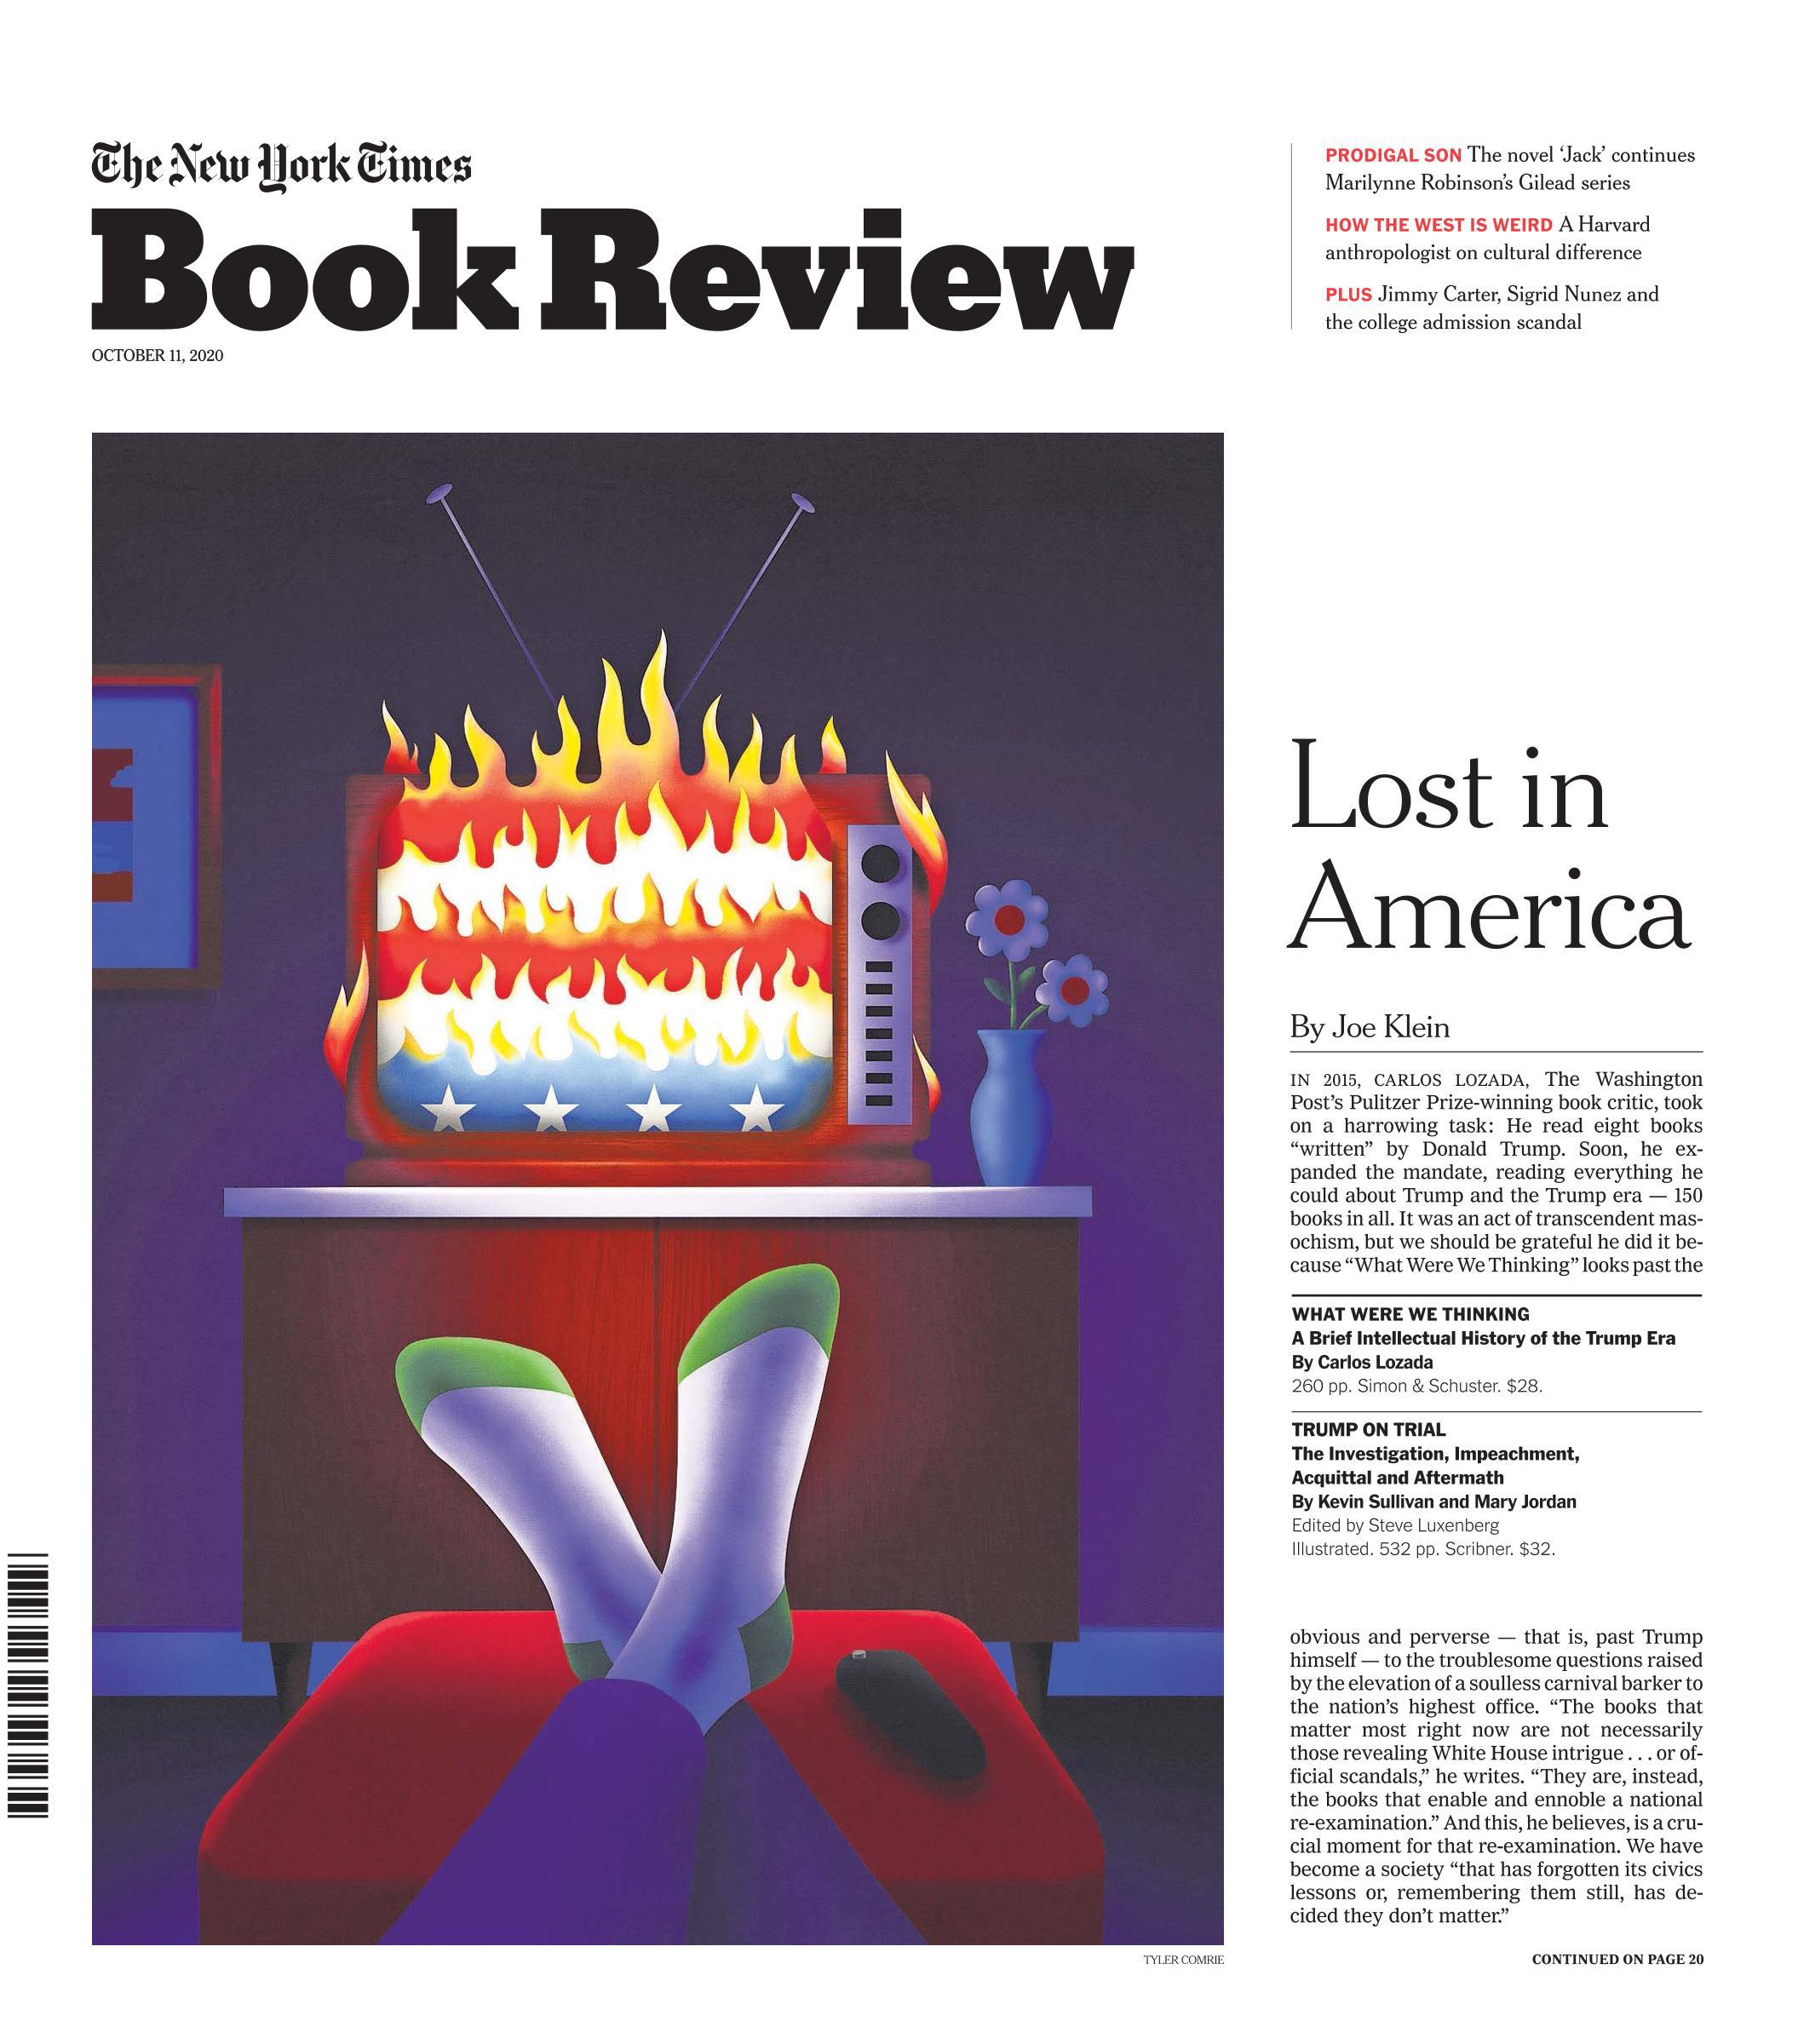 new york times book review 56 days